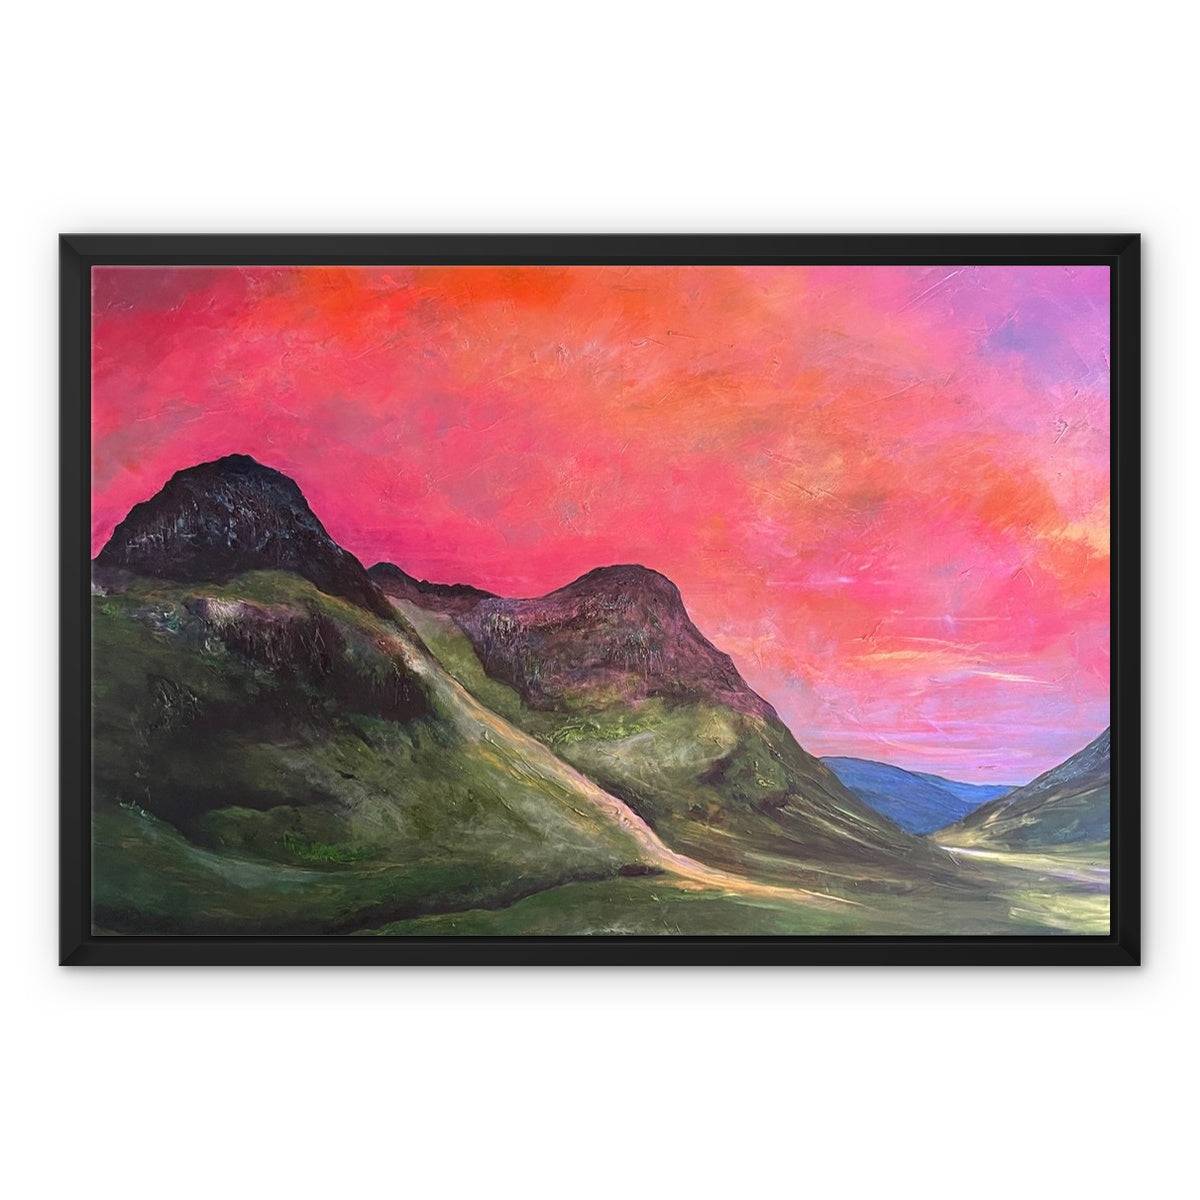 Glencoe Dusk Painting | Framed Canvas From Scotland-Floating Framed Canvas Prints-Glencoe Art Gallery-24"x18"-Black Frame-Paintings, Prints, Homeware, Art Gifts From Scotland By Scottish Artist Kevin Hunter